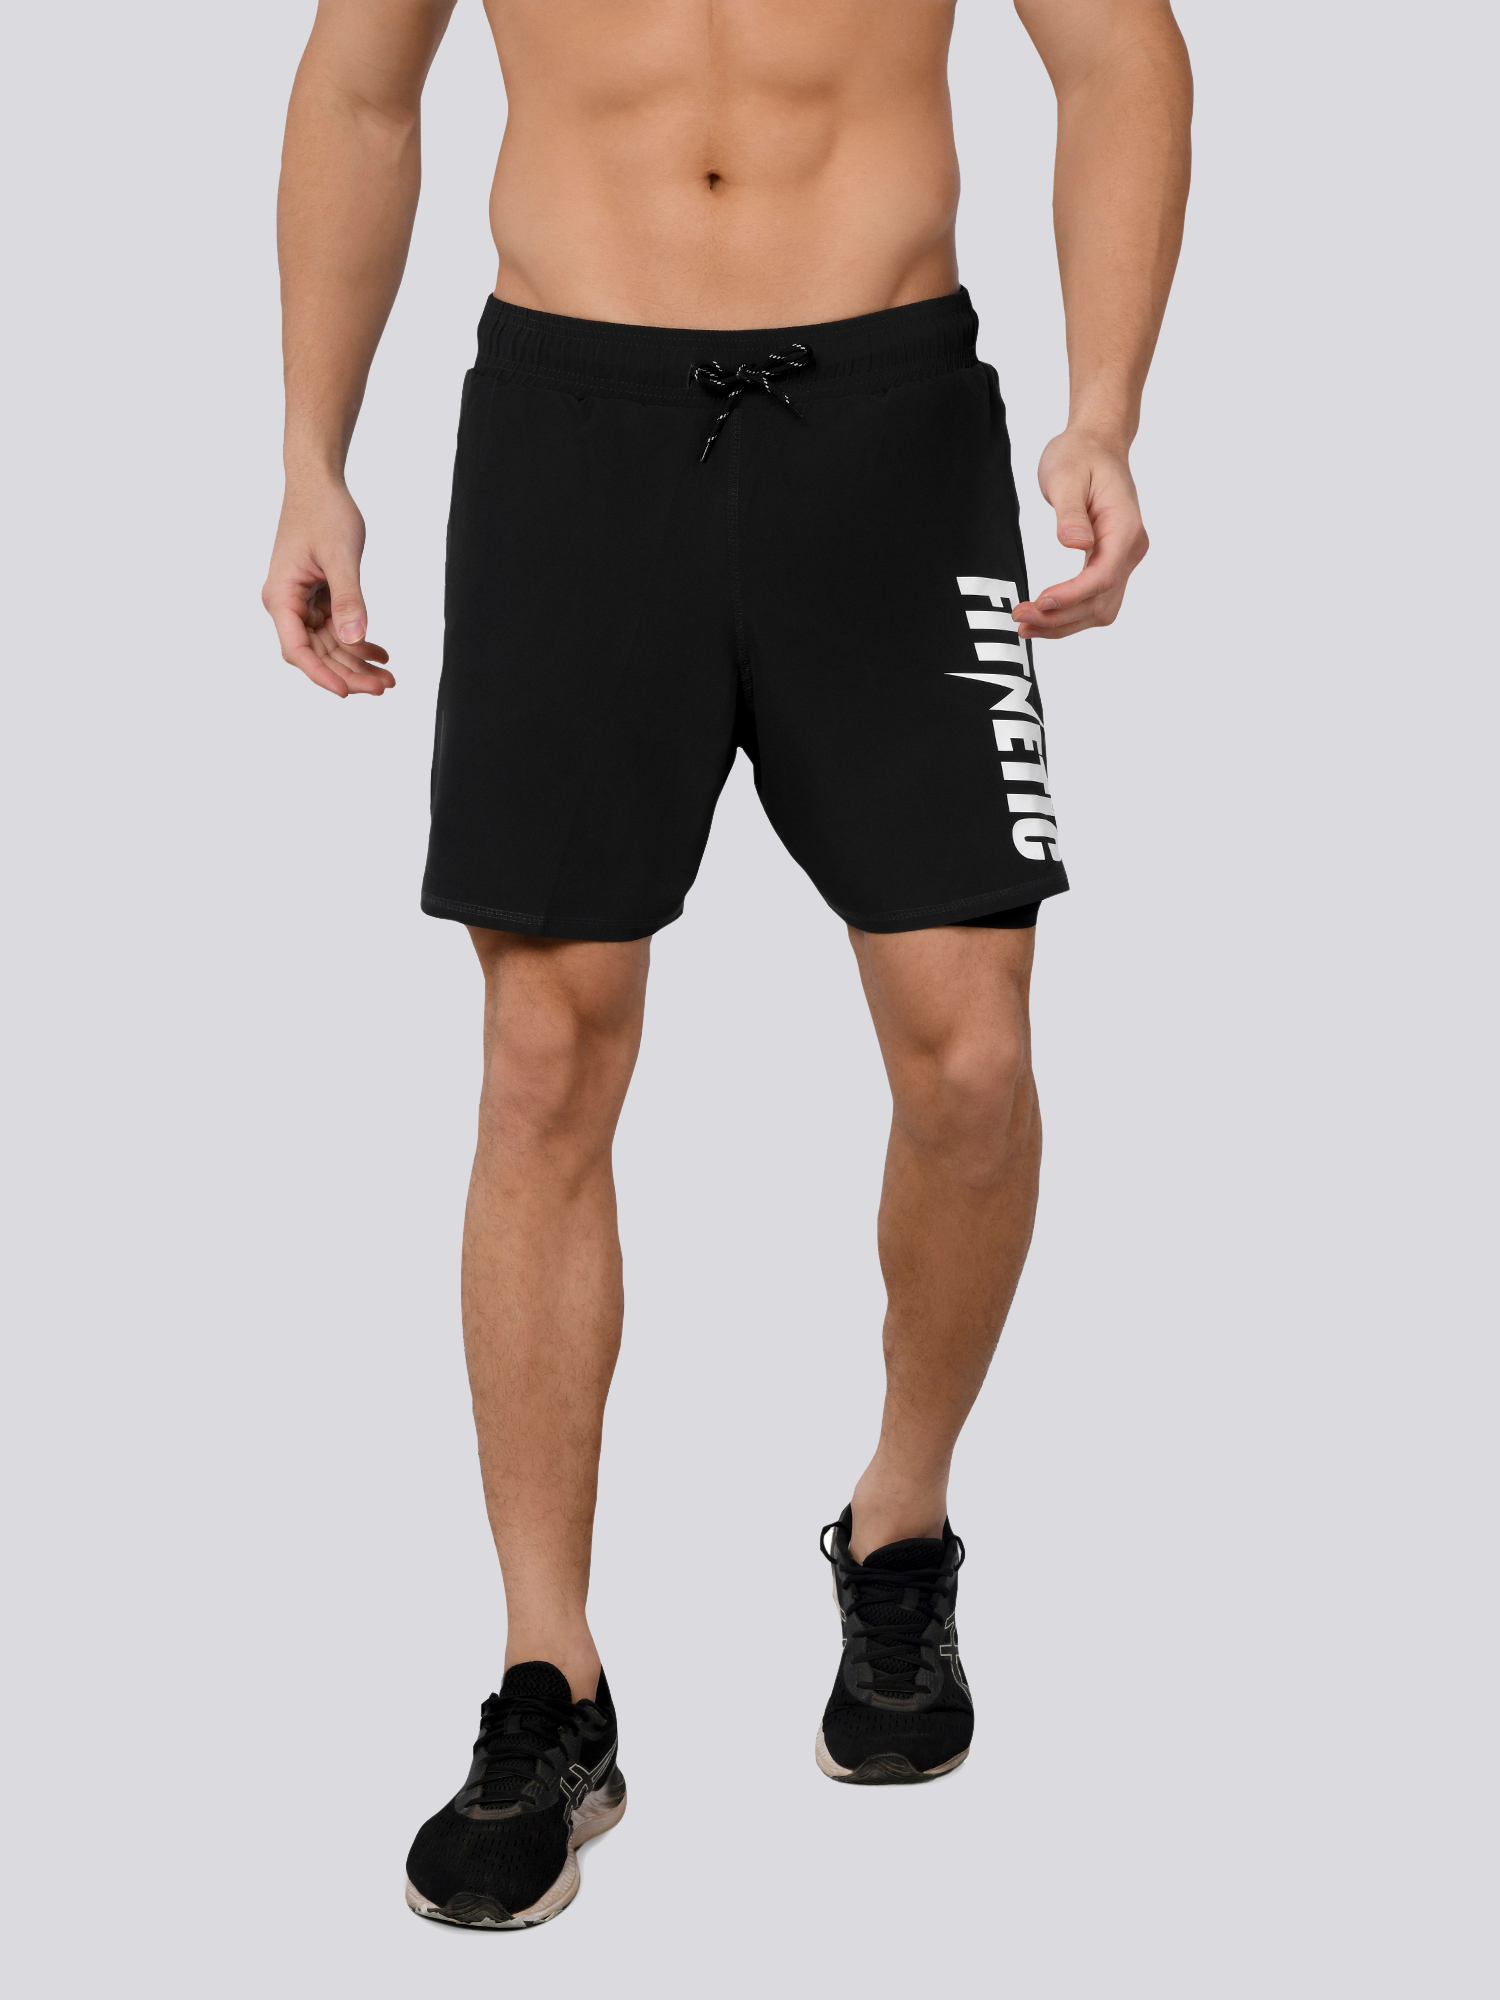 INNER COMPRESSION CHARCOAL GREY